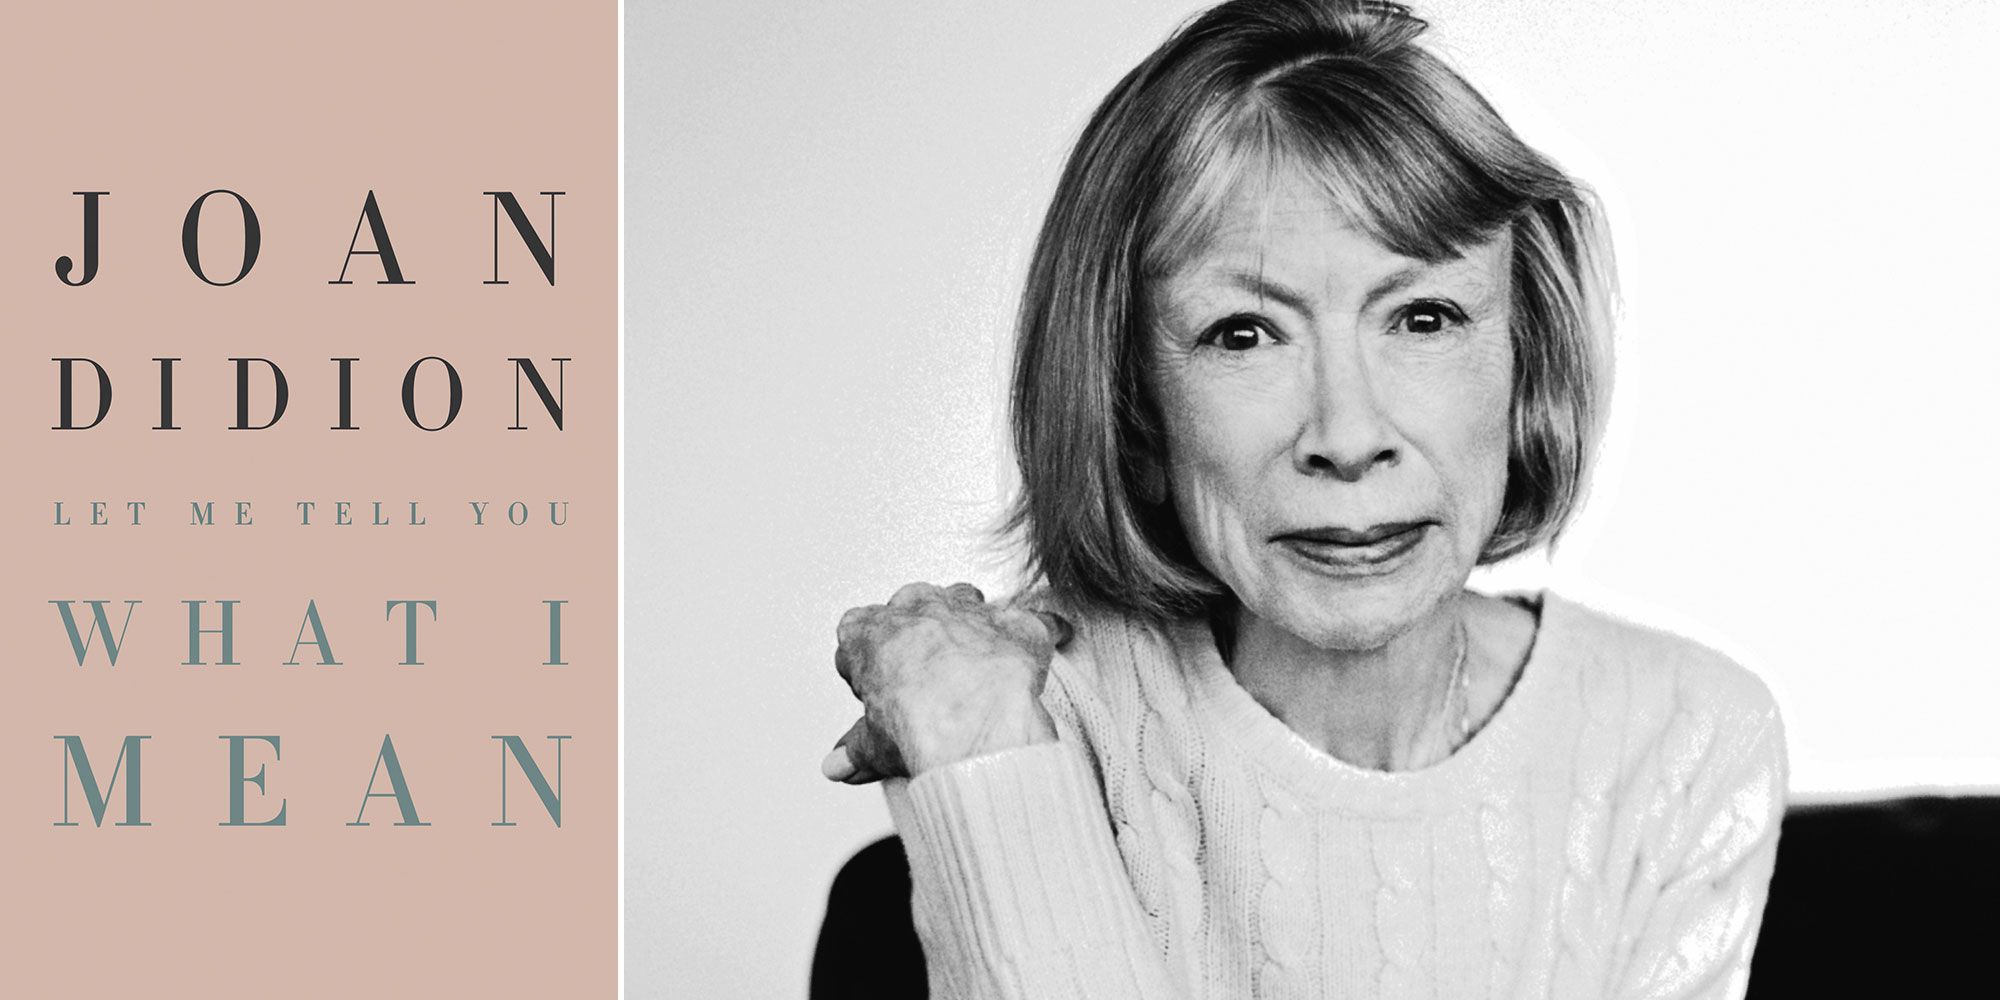 Joan Didion Interview Ahead of Let Me Tell You What I Mean